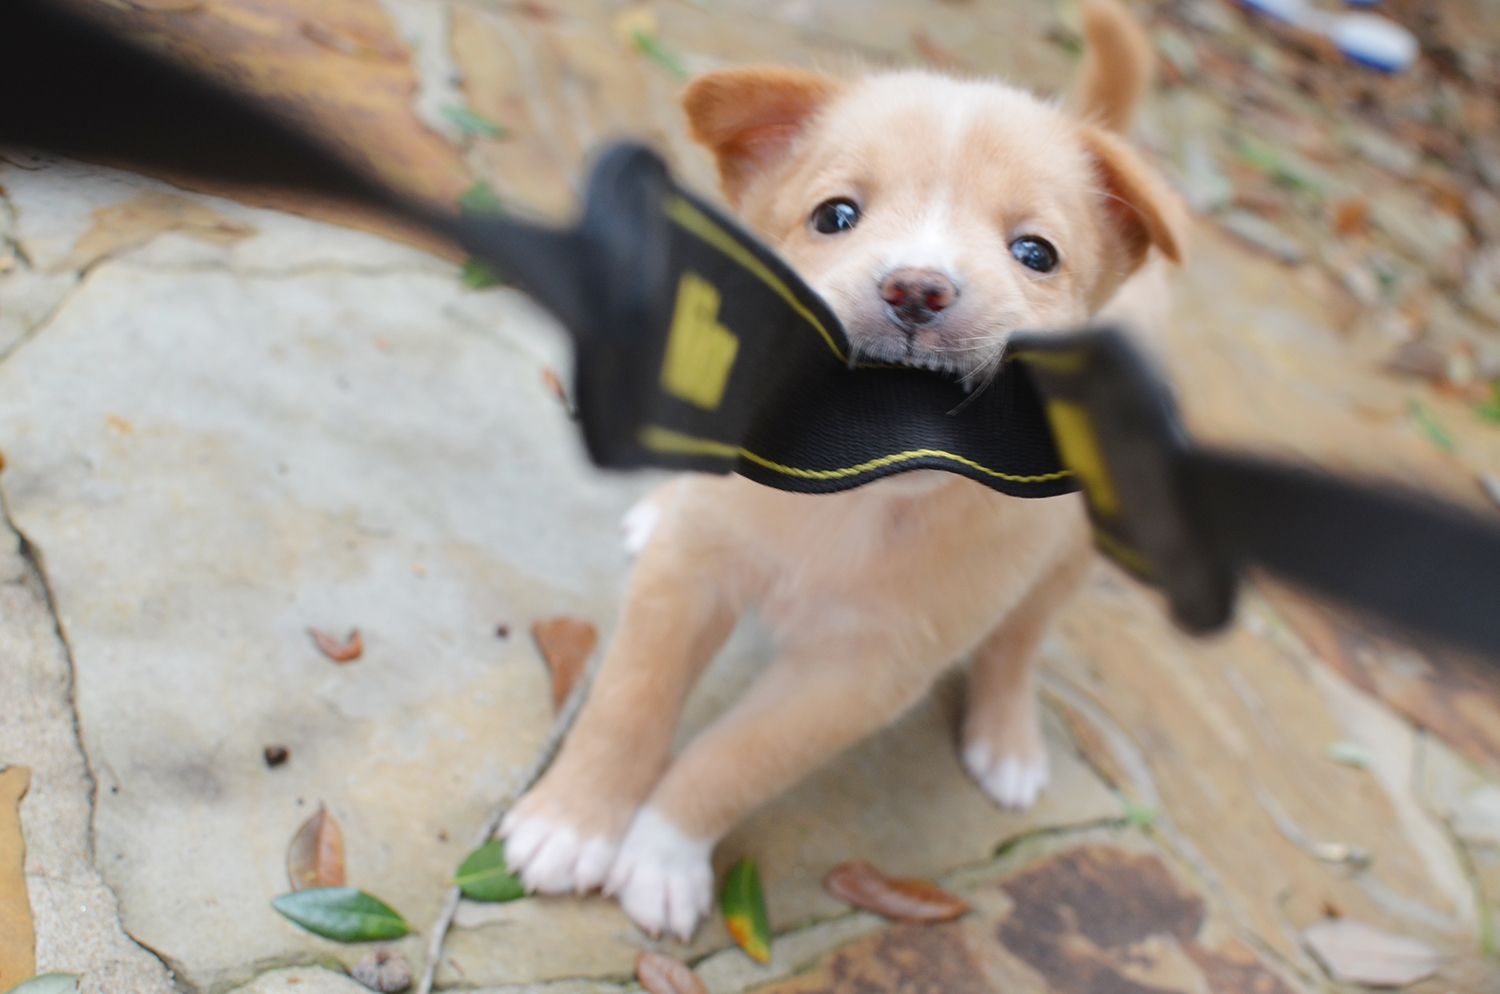 Playful puppy hates the camera.